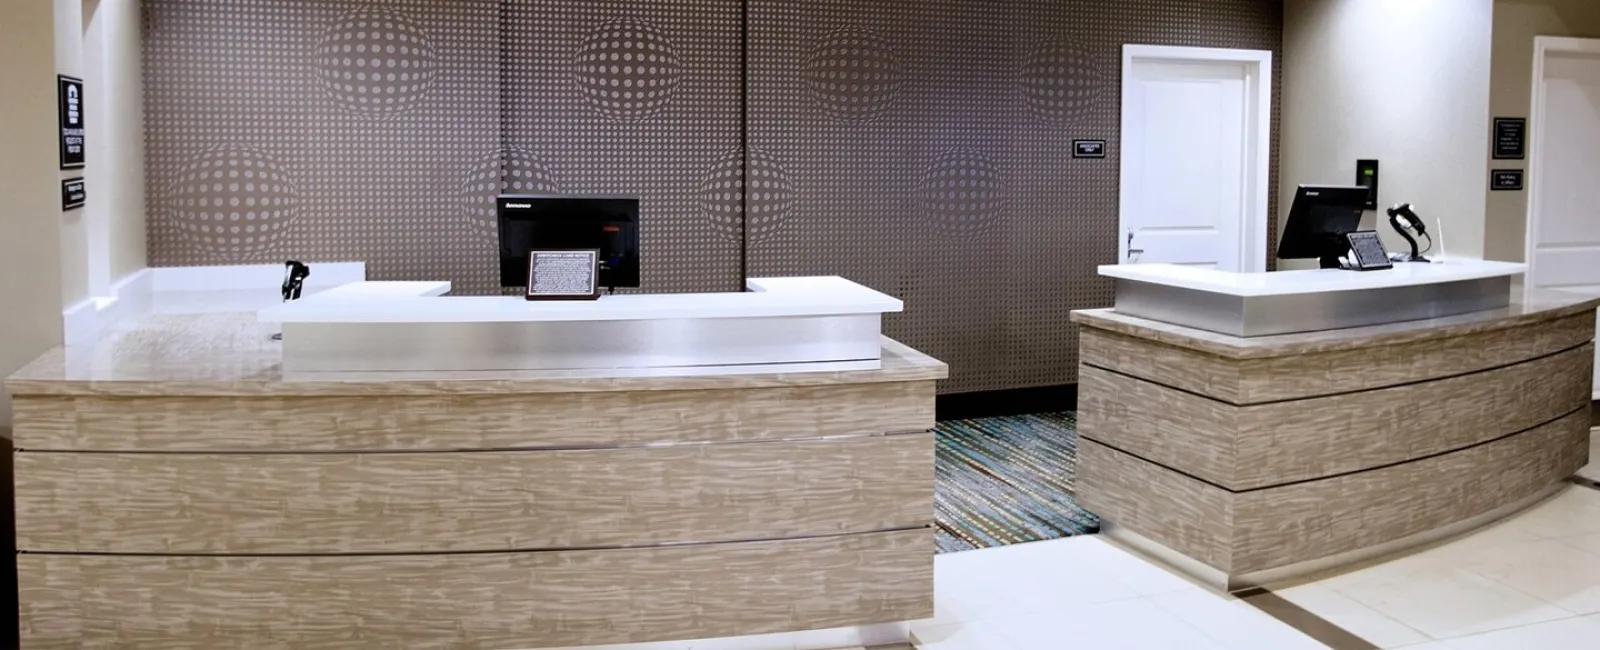 Residence Inn by Marriott Lake Charles LA Millwork and Countertops